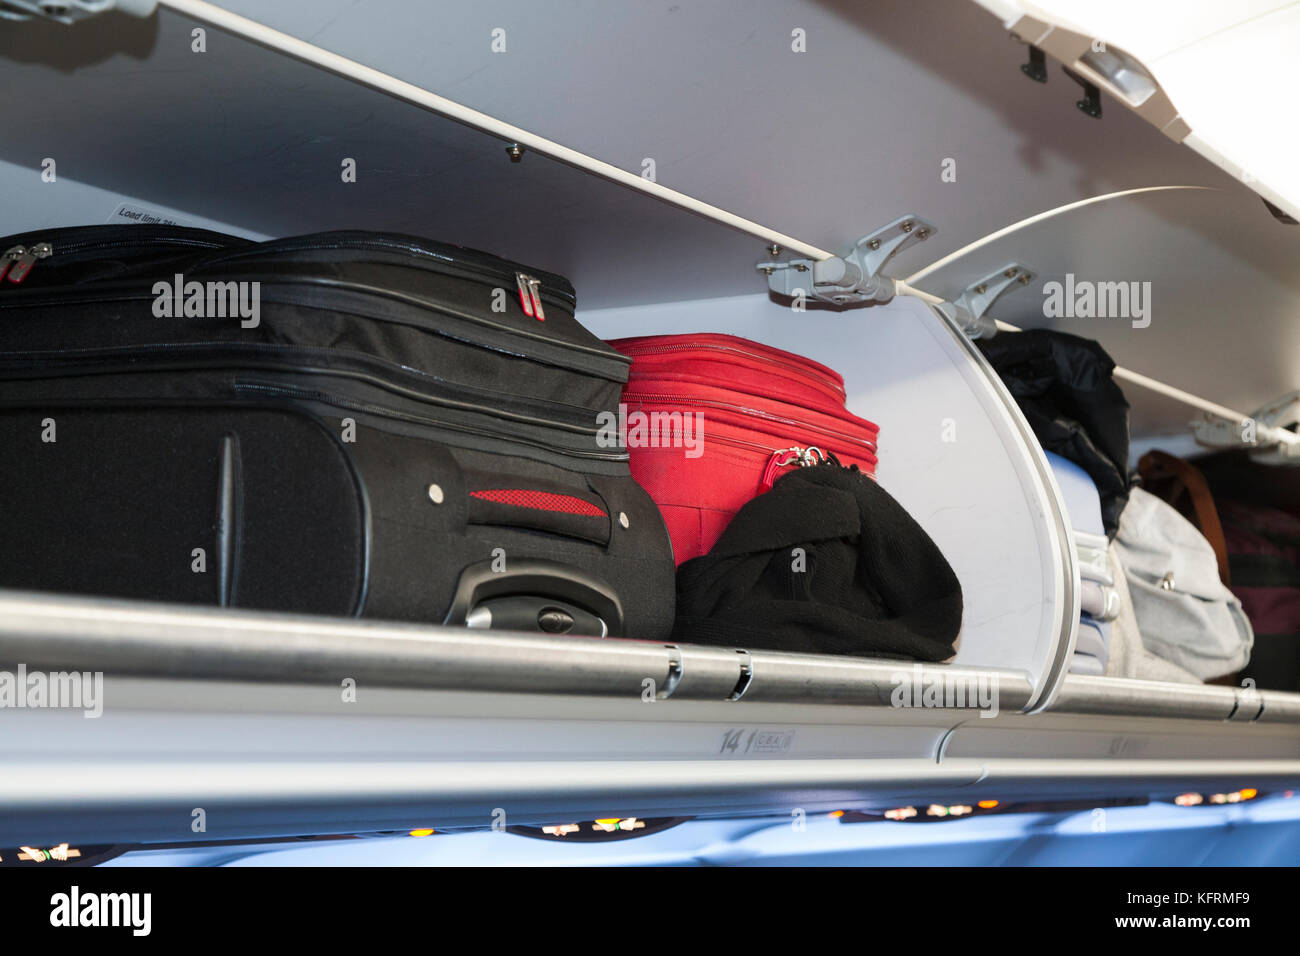 Overhead passenger locker lockers / compartment / compartments for stowing passengers bags cabin luggage; BA / British Airways Portugal flight. (76) Stock Photo